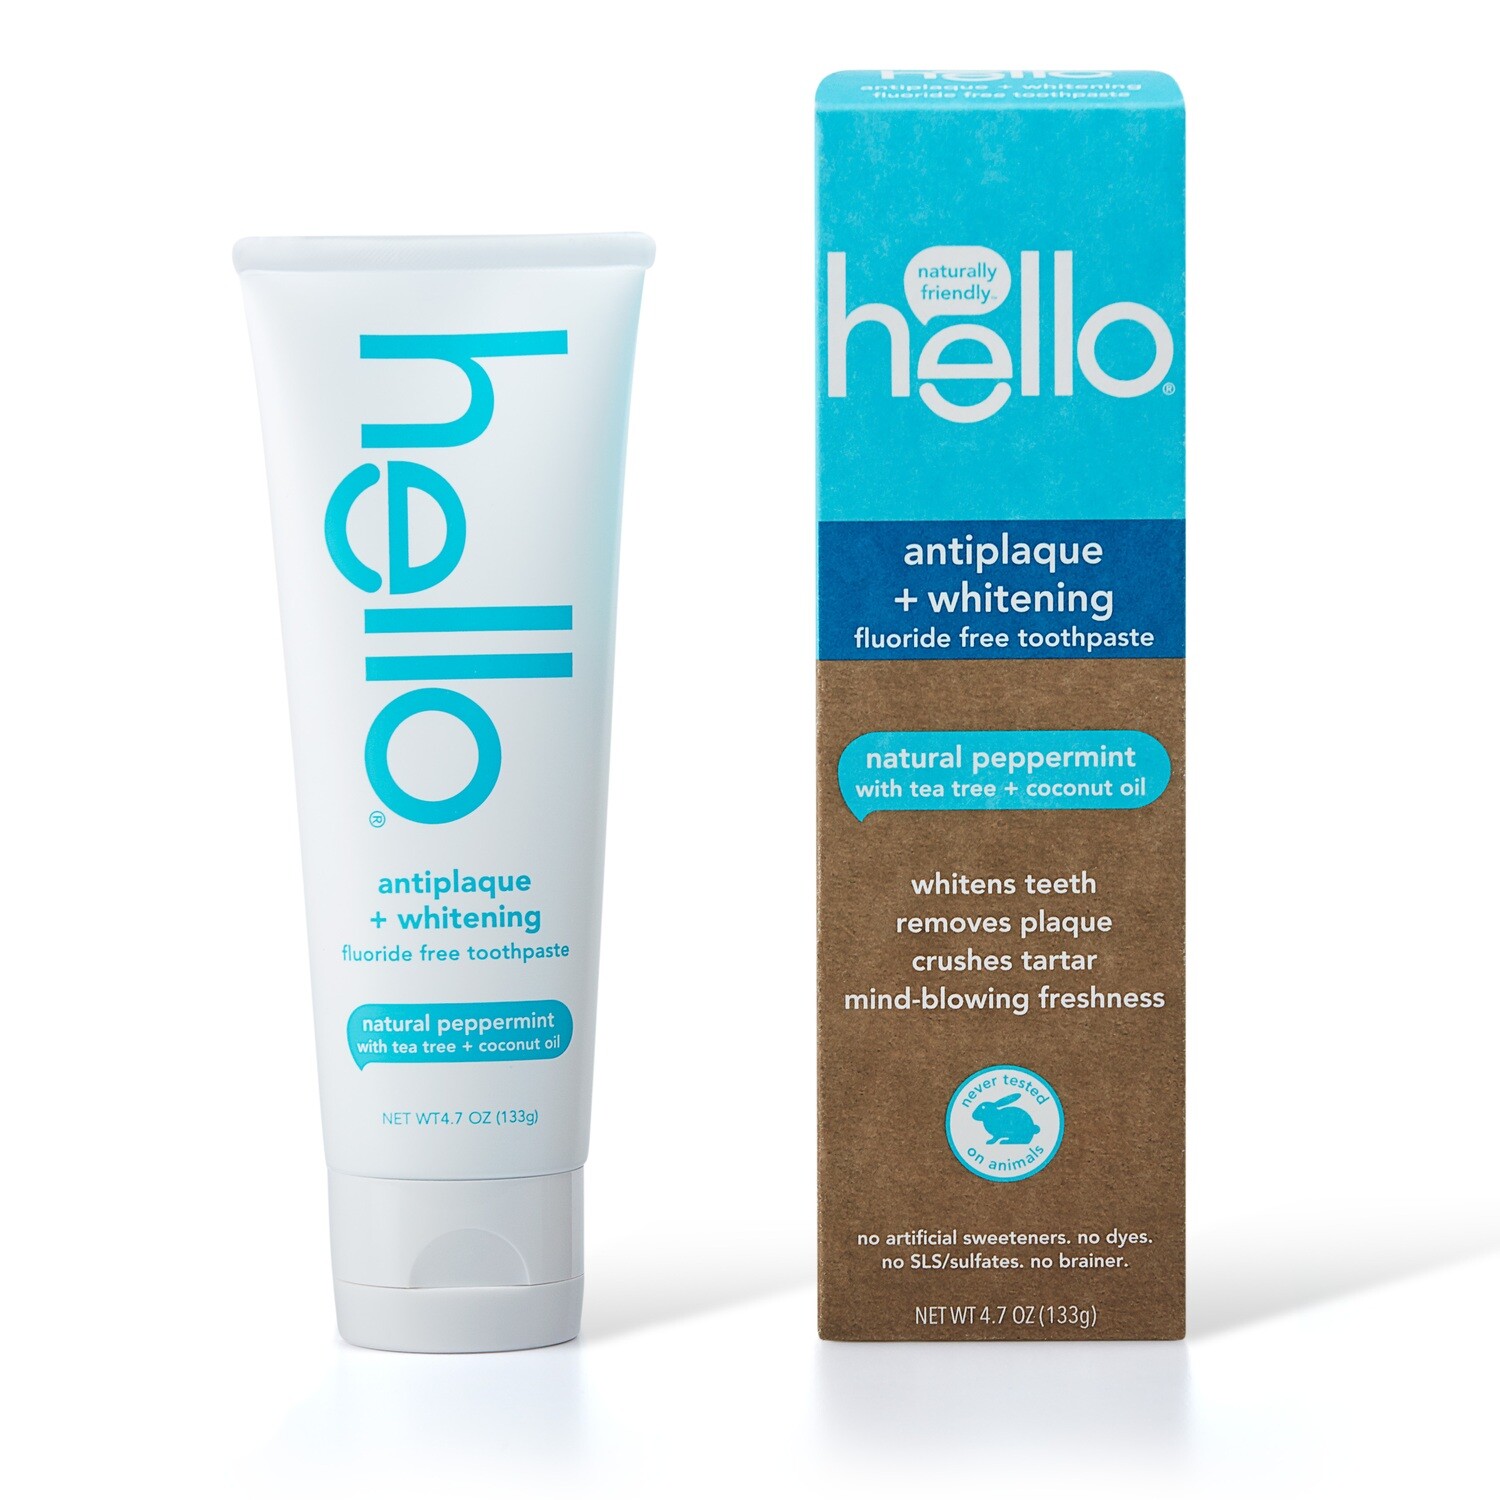 Hello Fluoride Toothpaste Antiplaque + Whitening Natural Peppermint with tea tree + coconut oil